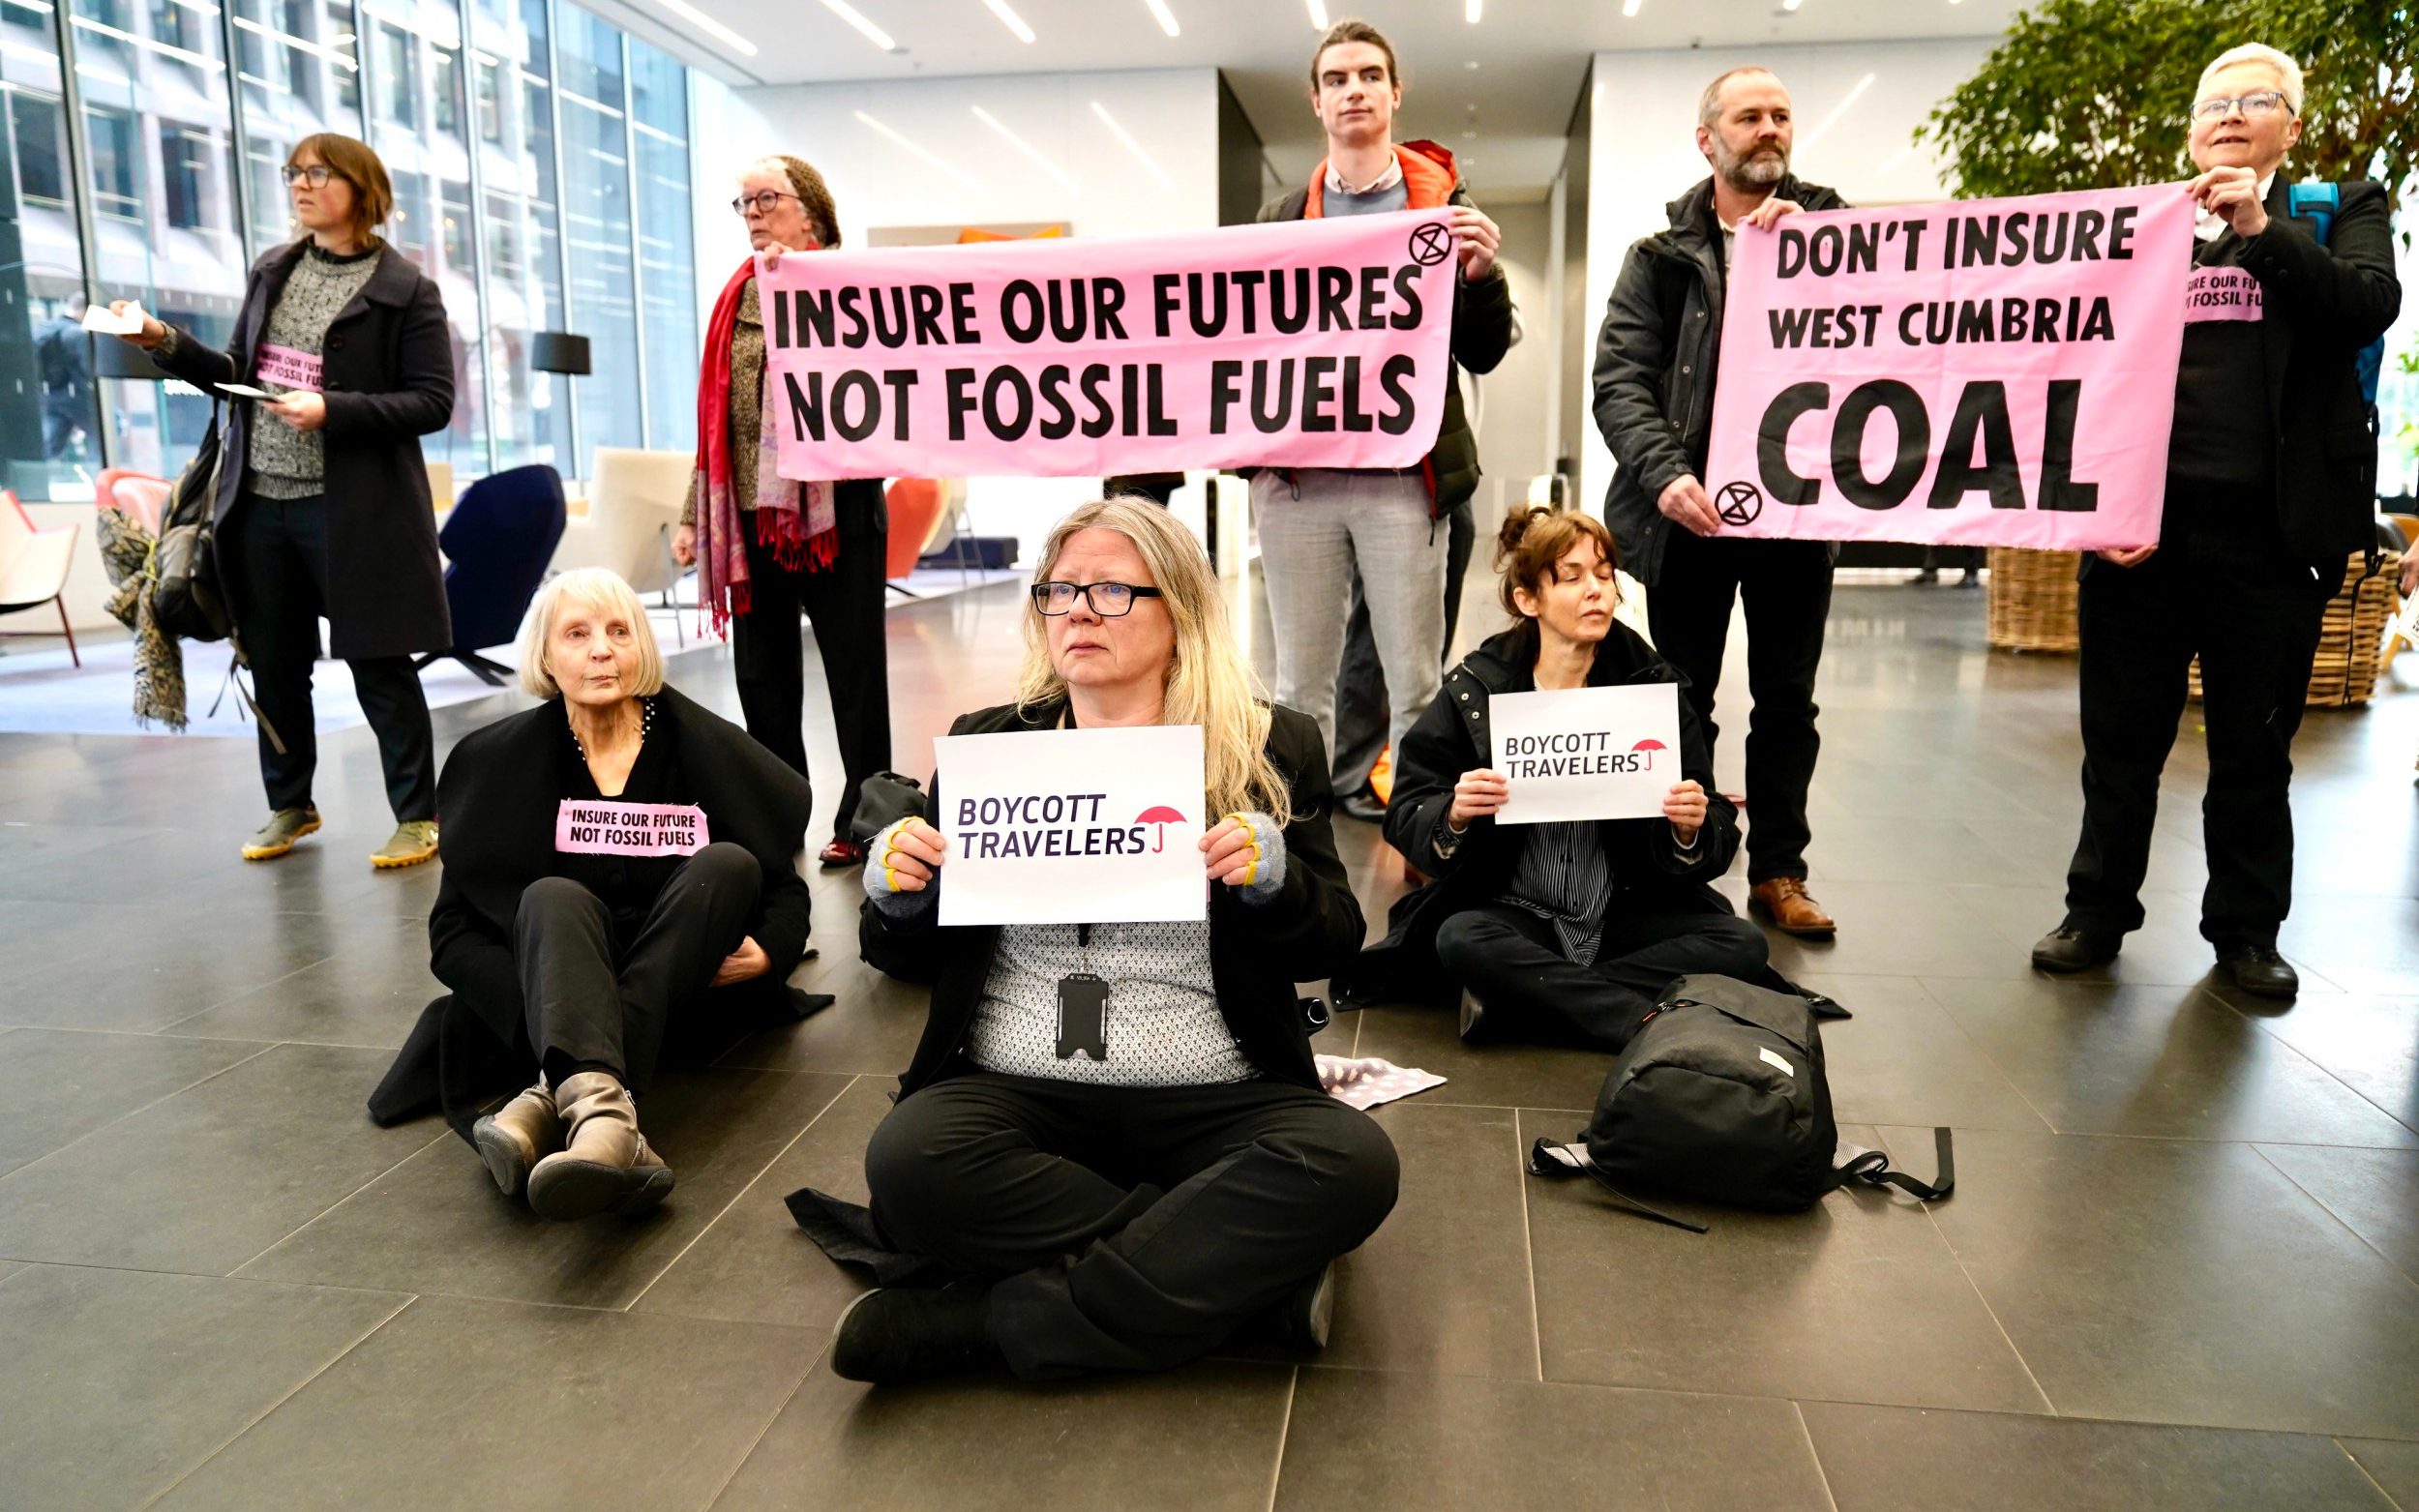 microsoft, extinction rebellion protesters storm walkie talkie dressed in suits